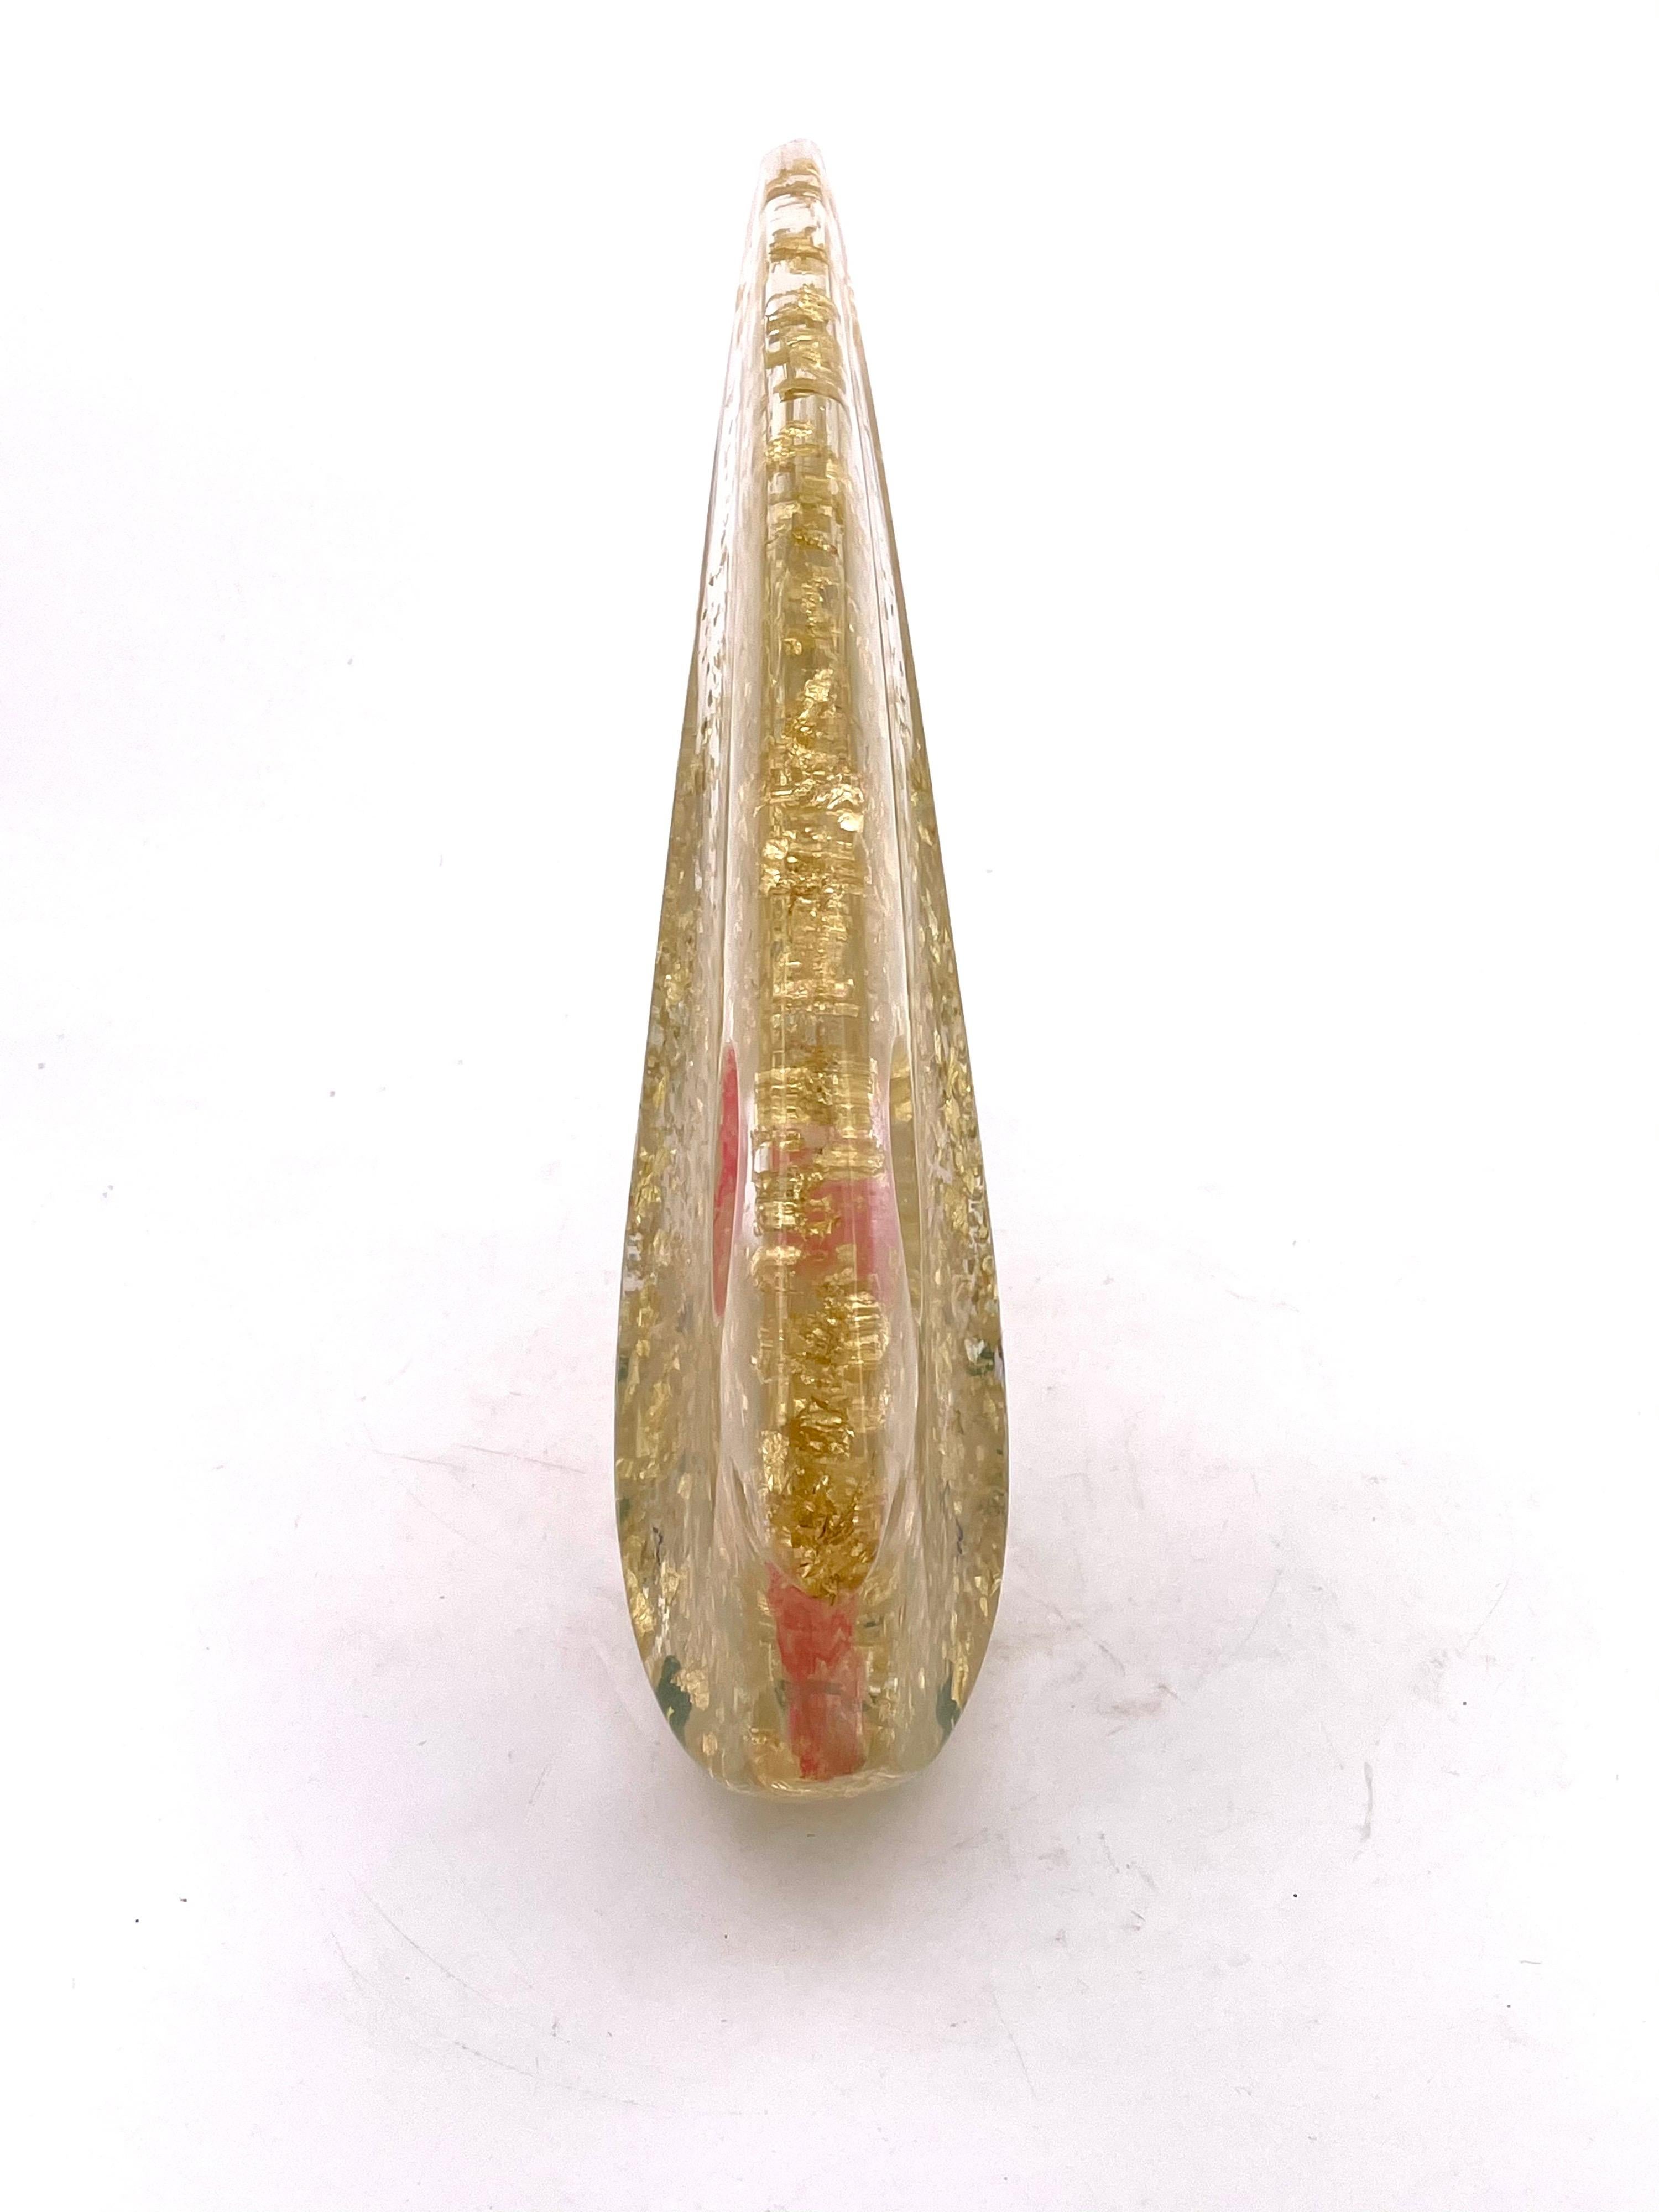 Mid-Century Modern Striking Lucite Fish Sculpture with Gold Flakes by Jaru